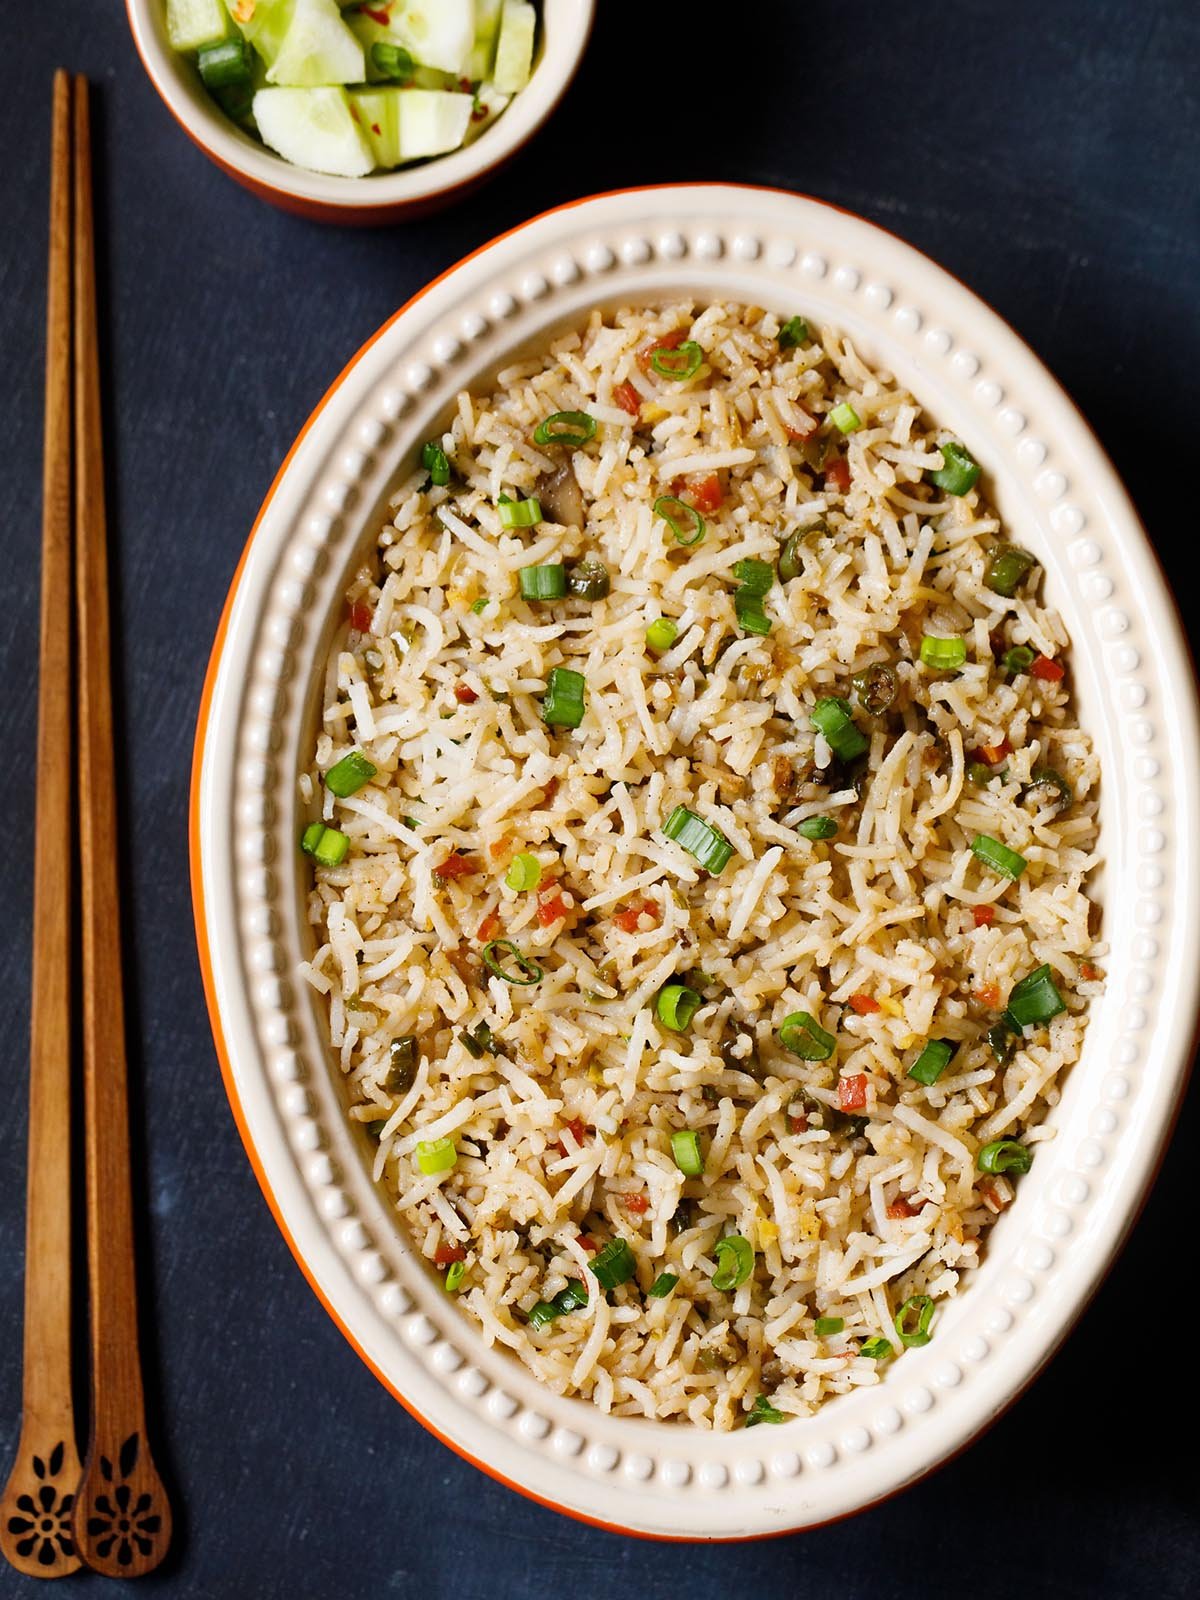 veg fried rice in an oval ceramic bowl with wooden chopsticks on a slate black board